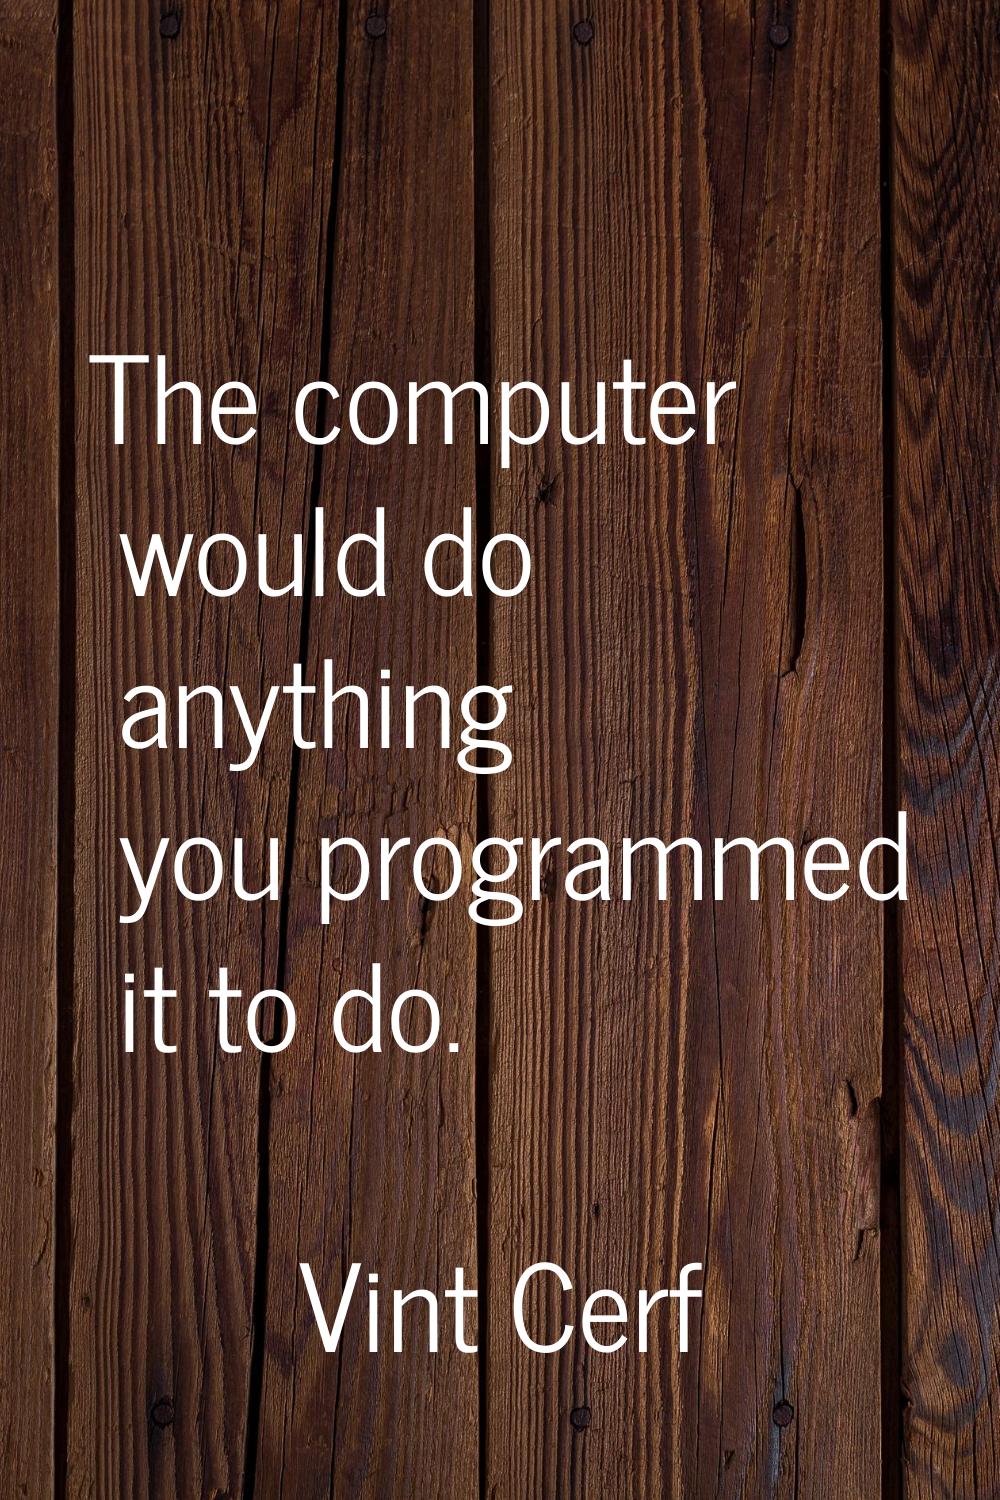 The computer would do anything you programmed it to do.